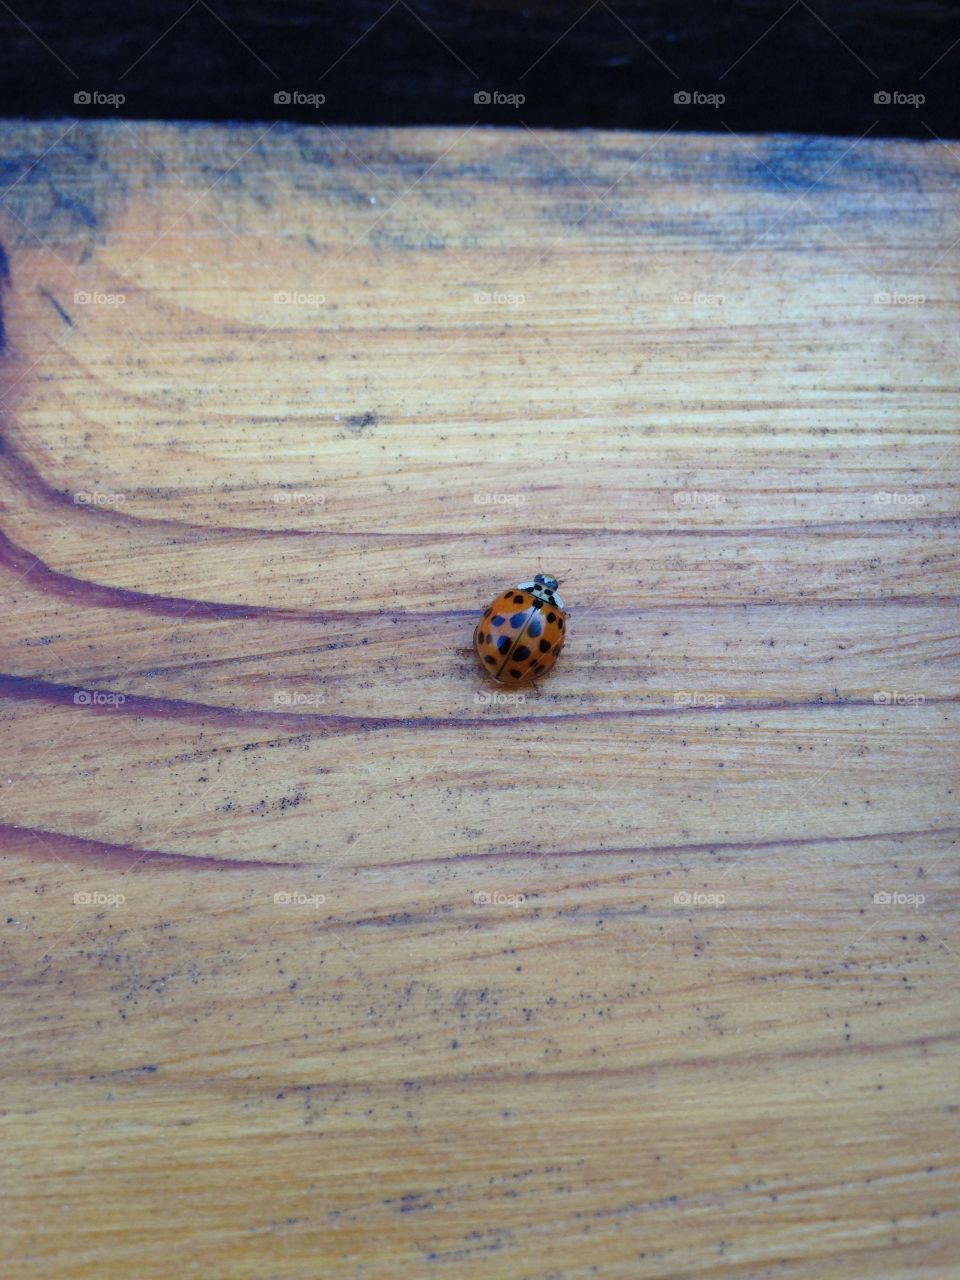 Springtime means ladybugs are back!